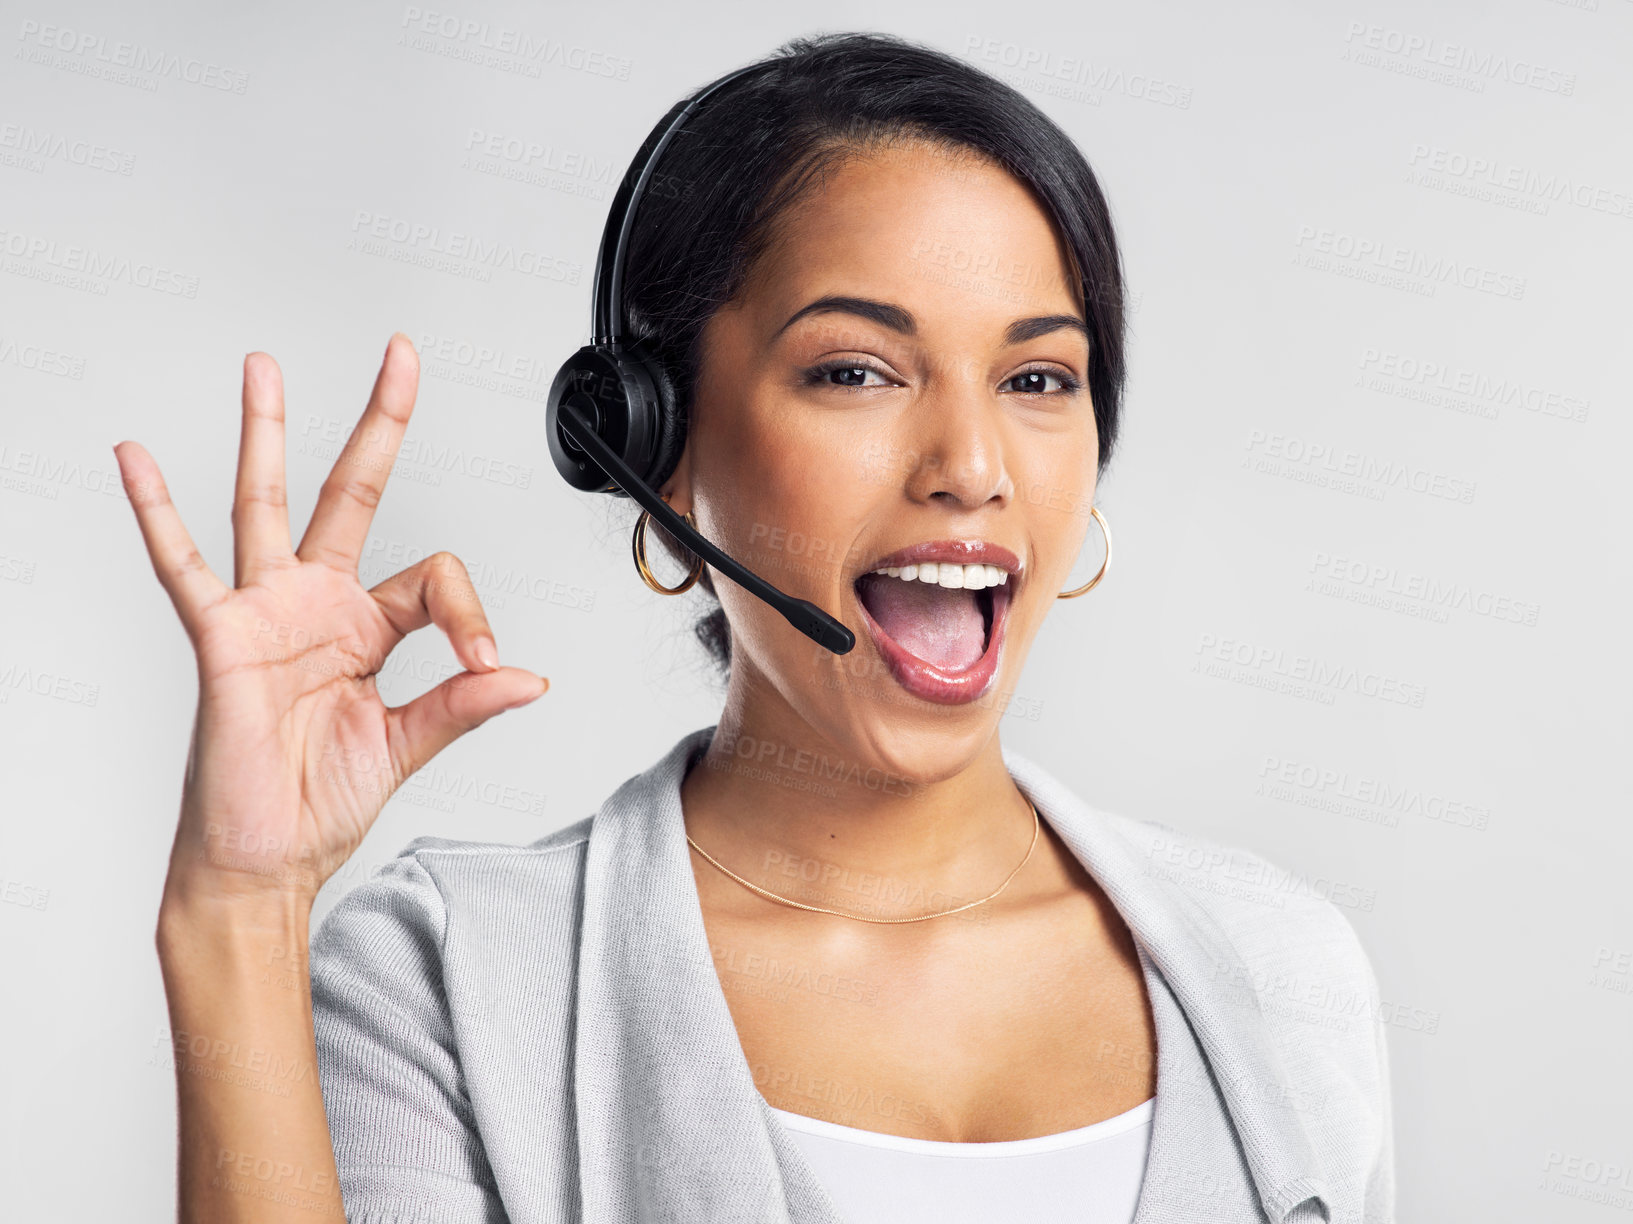 Buy stock photo Studio shot of a young businesswoman using a headset and showing an okay sign against a grey background